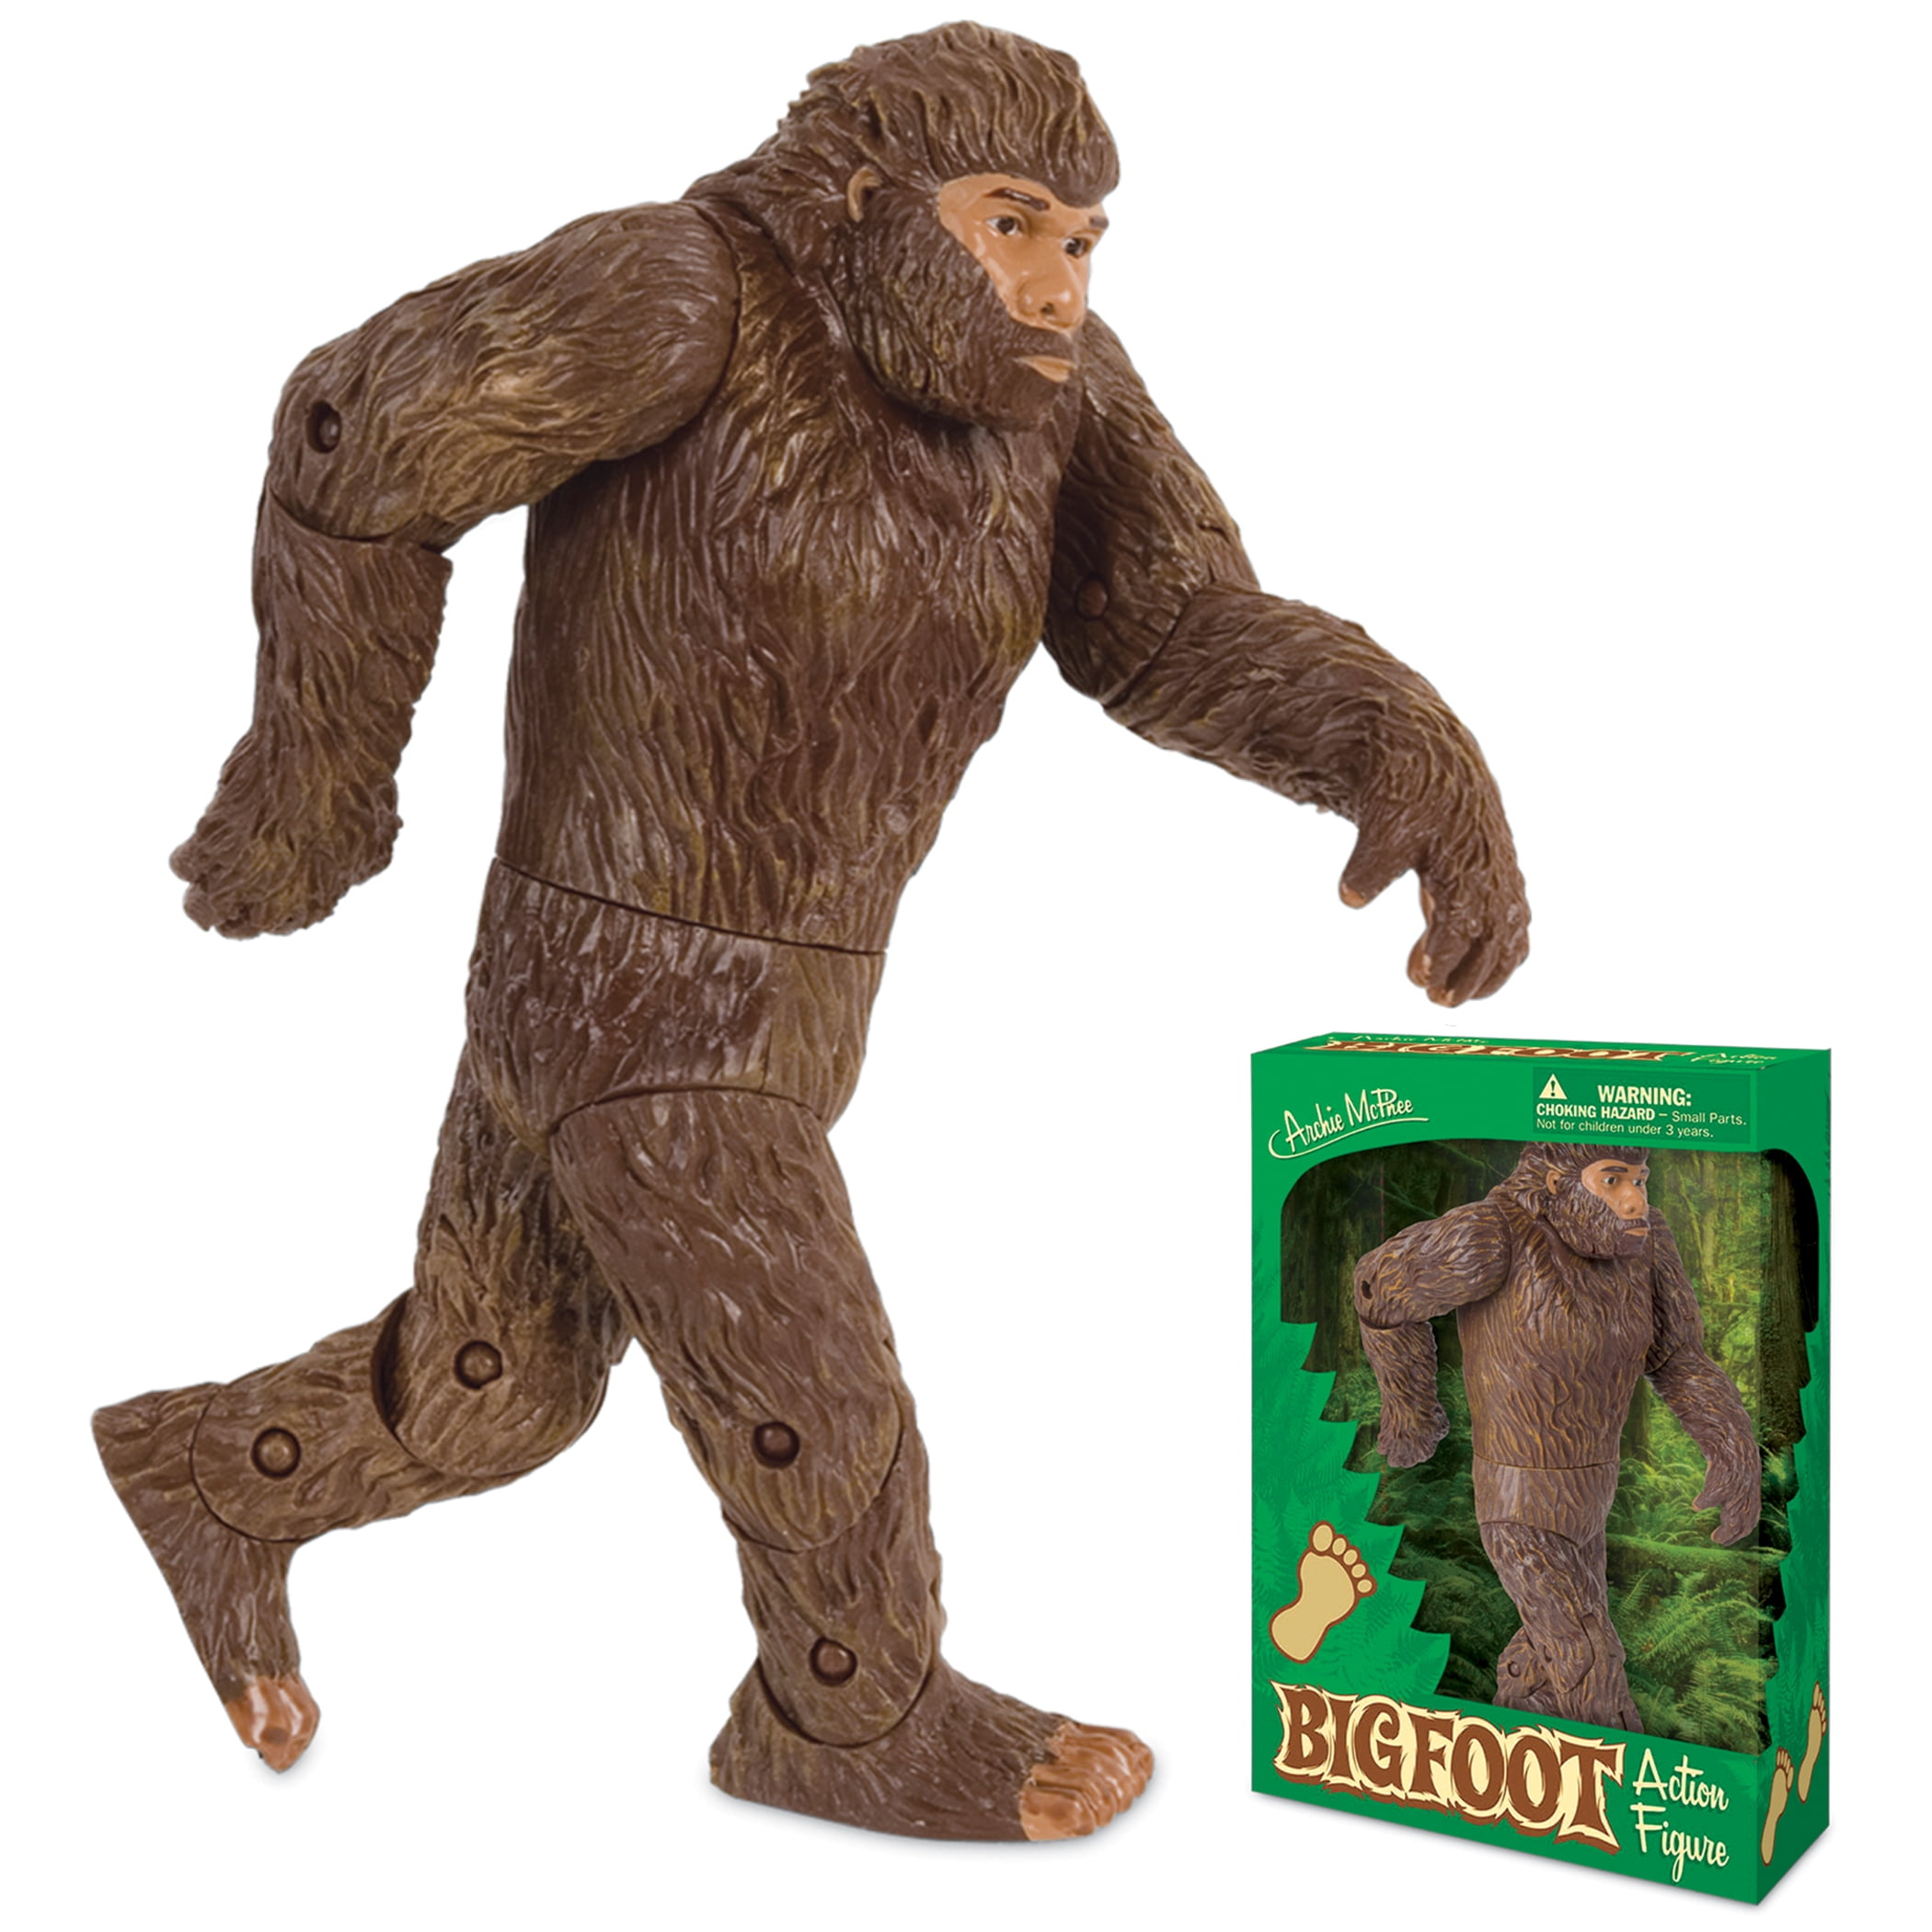 Bigfoot Sasquatch Action Figure Toy Brown 4” USA Made & Shipped 3D Printed 